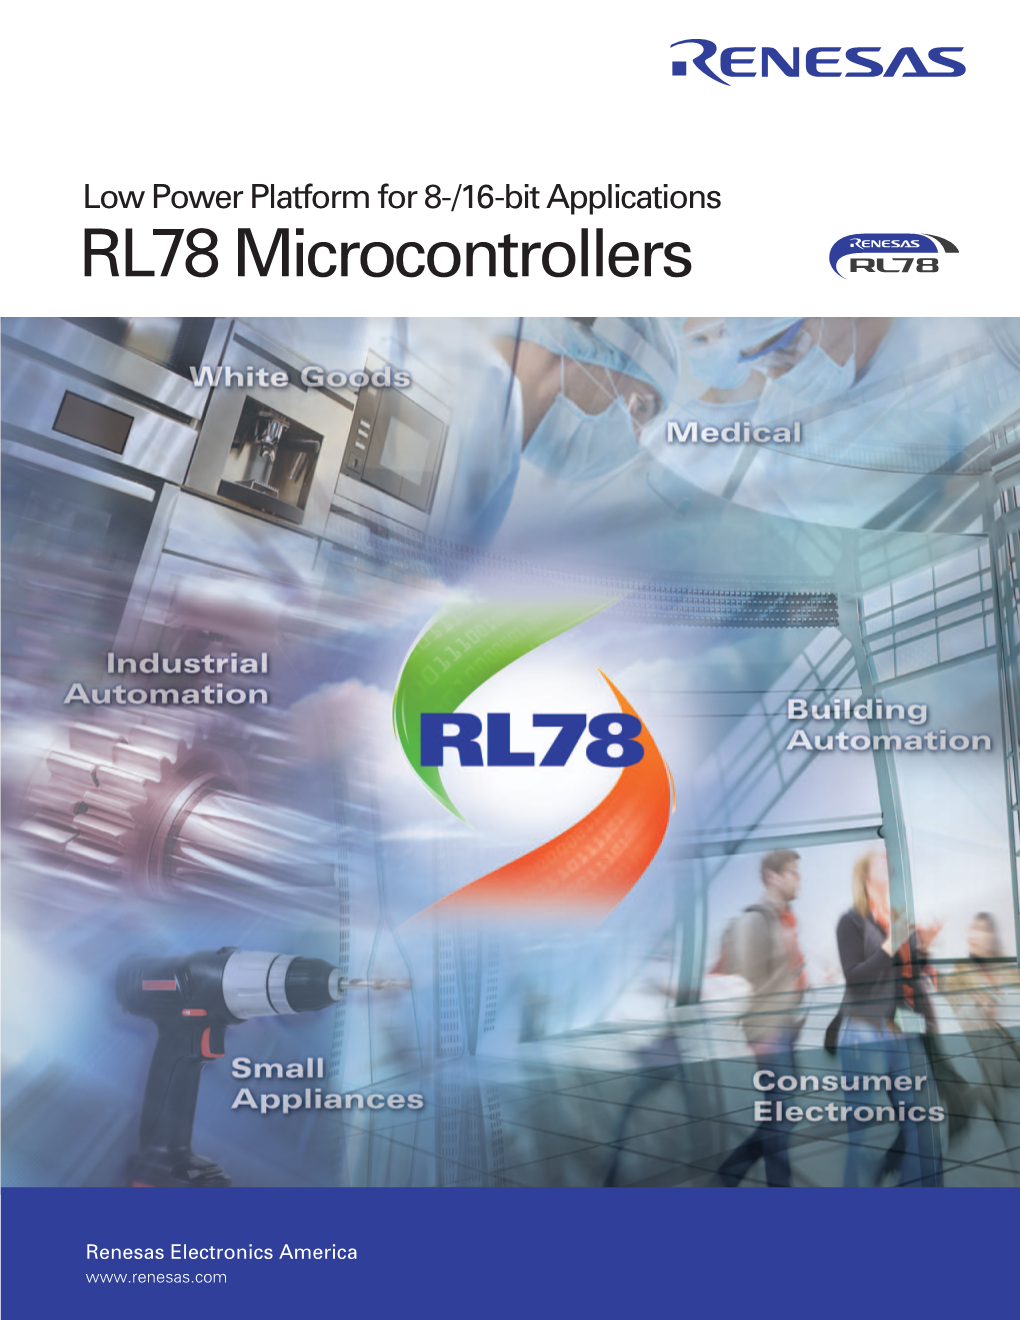 Low Power Platform for 8-/16-Bit Applications RL78 Microcontrollers